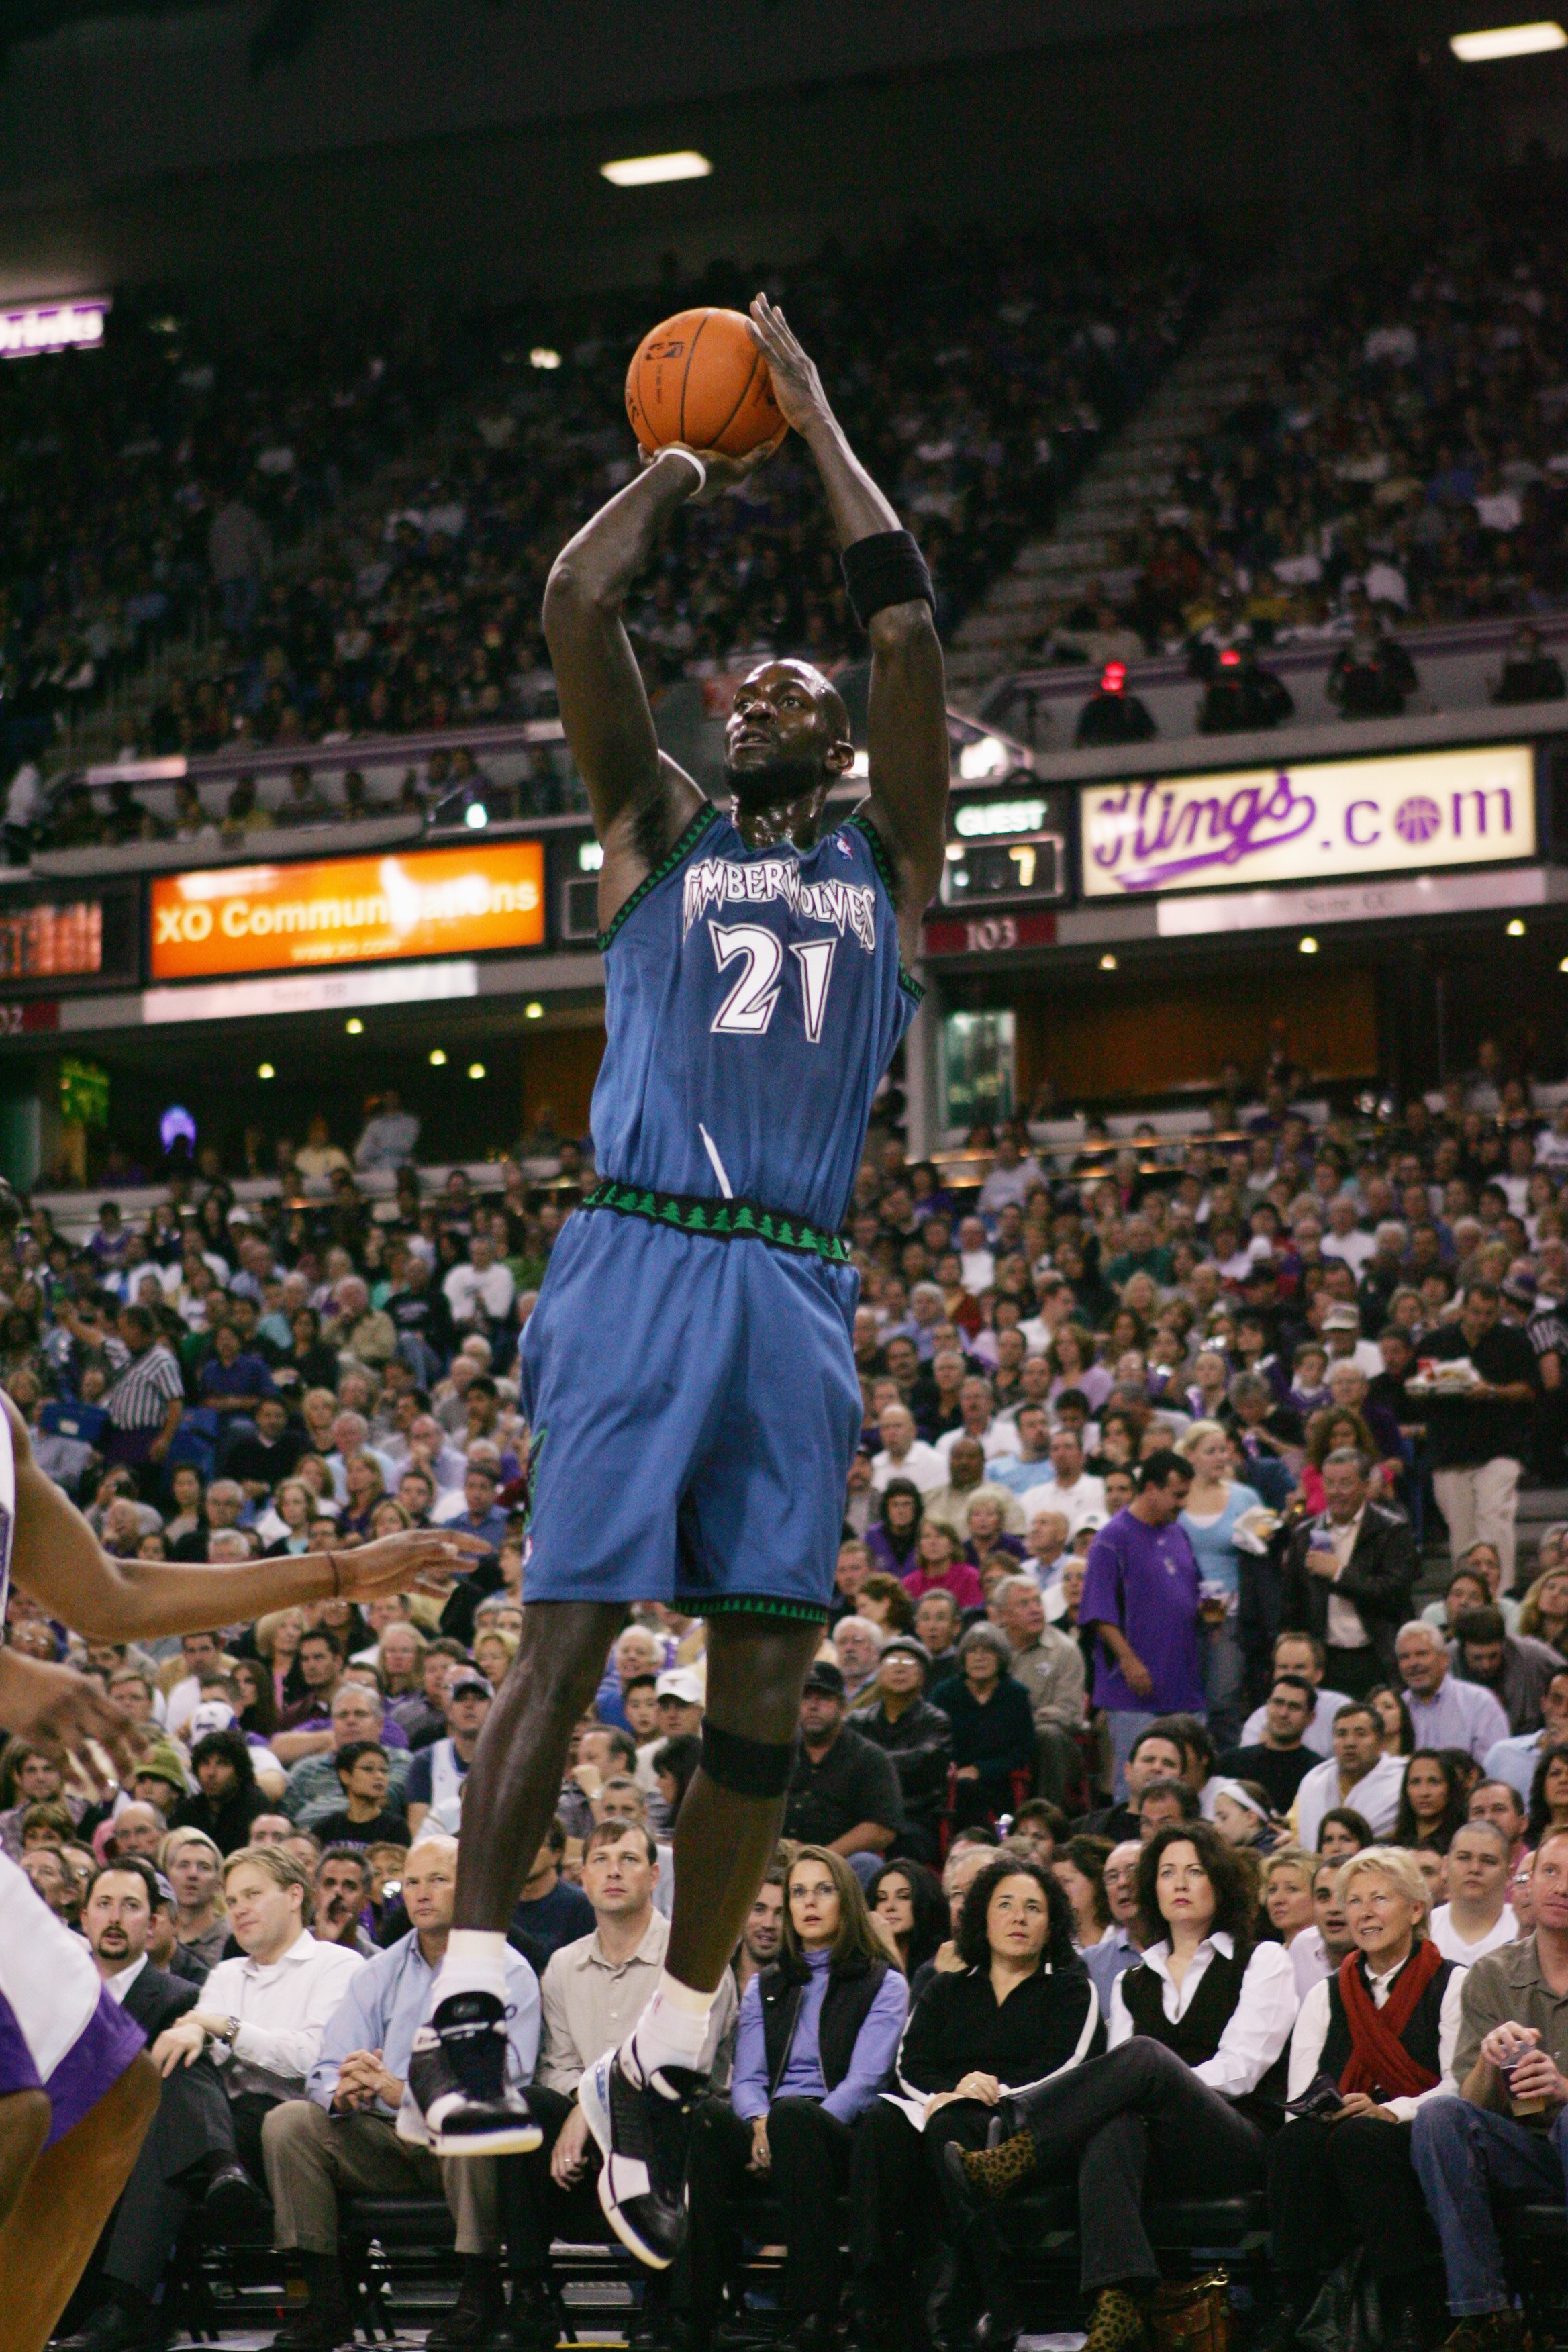 SACRAMENTO, CA - NOVEMBER 6:  Kevin Garnett #21 of the Minnesota Timberwolves shoots a jump shot during a game against the Sacramento Kings at Arco Arena on November 6, 2006 in Sacramento, California.  The Kings won 93-81.  NOTE TO USER: User expressly ac